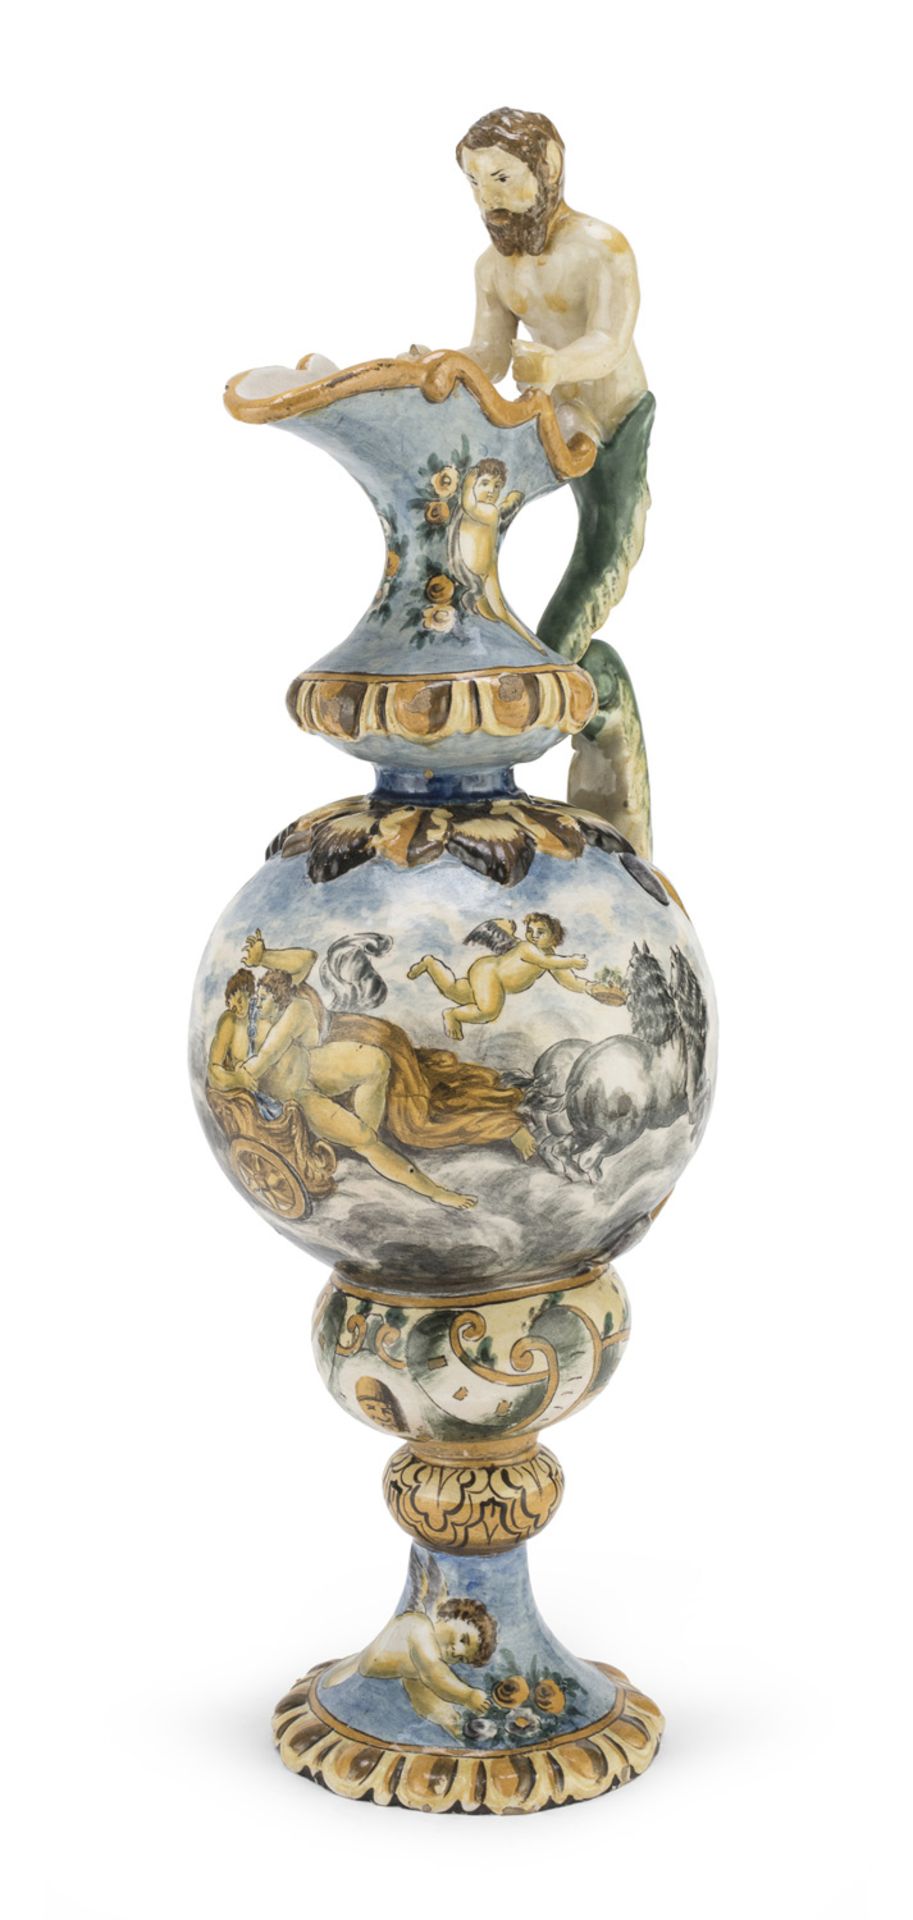 MAJOLICA PITCHER PROBABLY ROMAN CASTLES 19TH CENTURY - Image 2 of 2